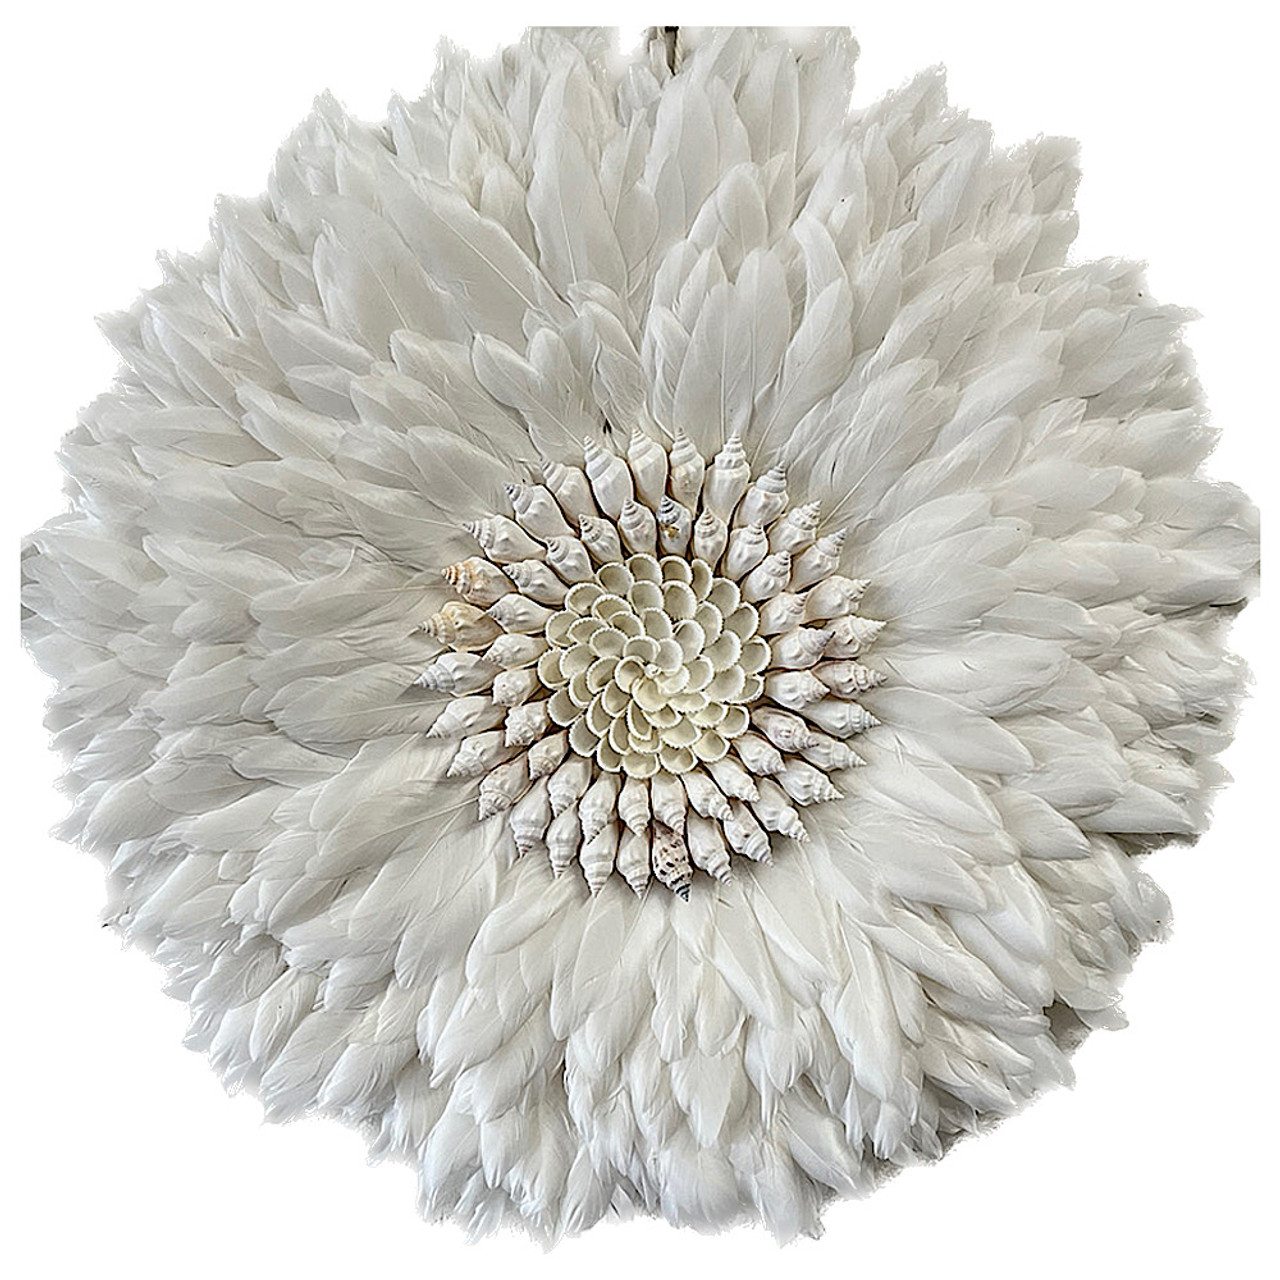 Boho Wall Hanging Juju LUX  shell  Wall Hanging  home decoration. Three sixes Small 50cm, Medium 60cm, Large 70cm
Diameter is taken from end of the feathers.